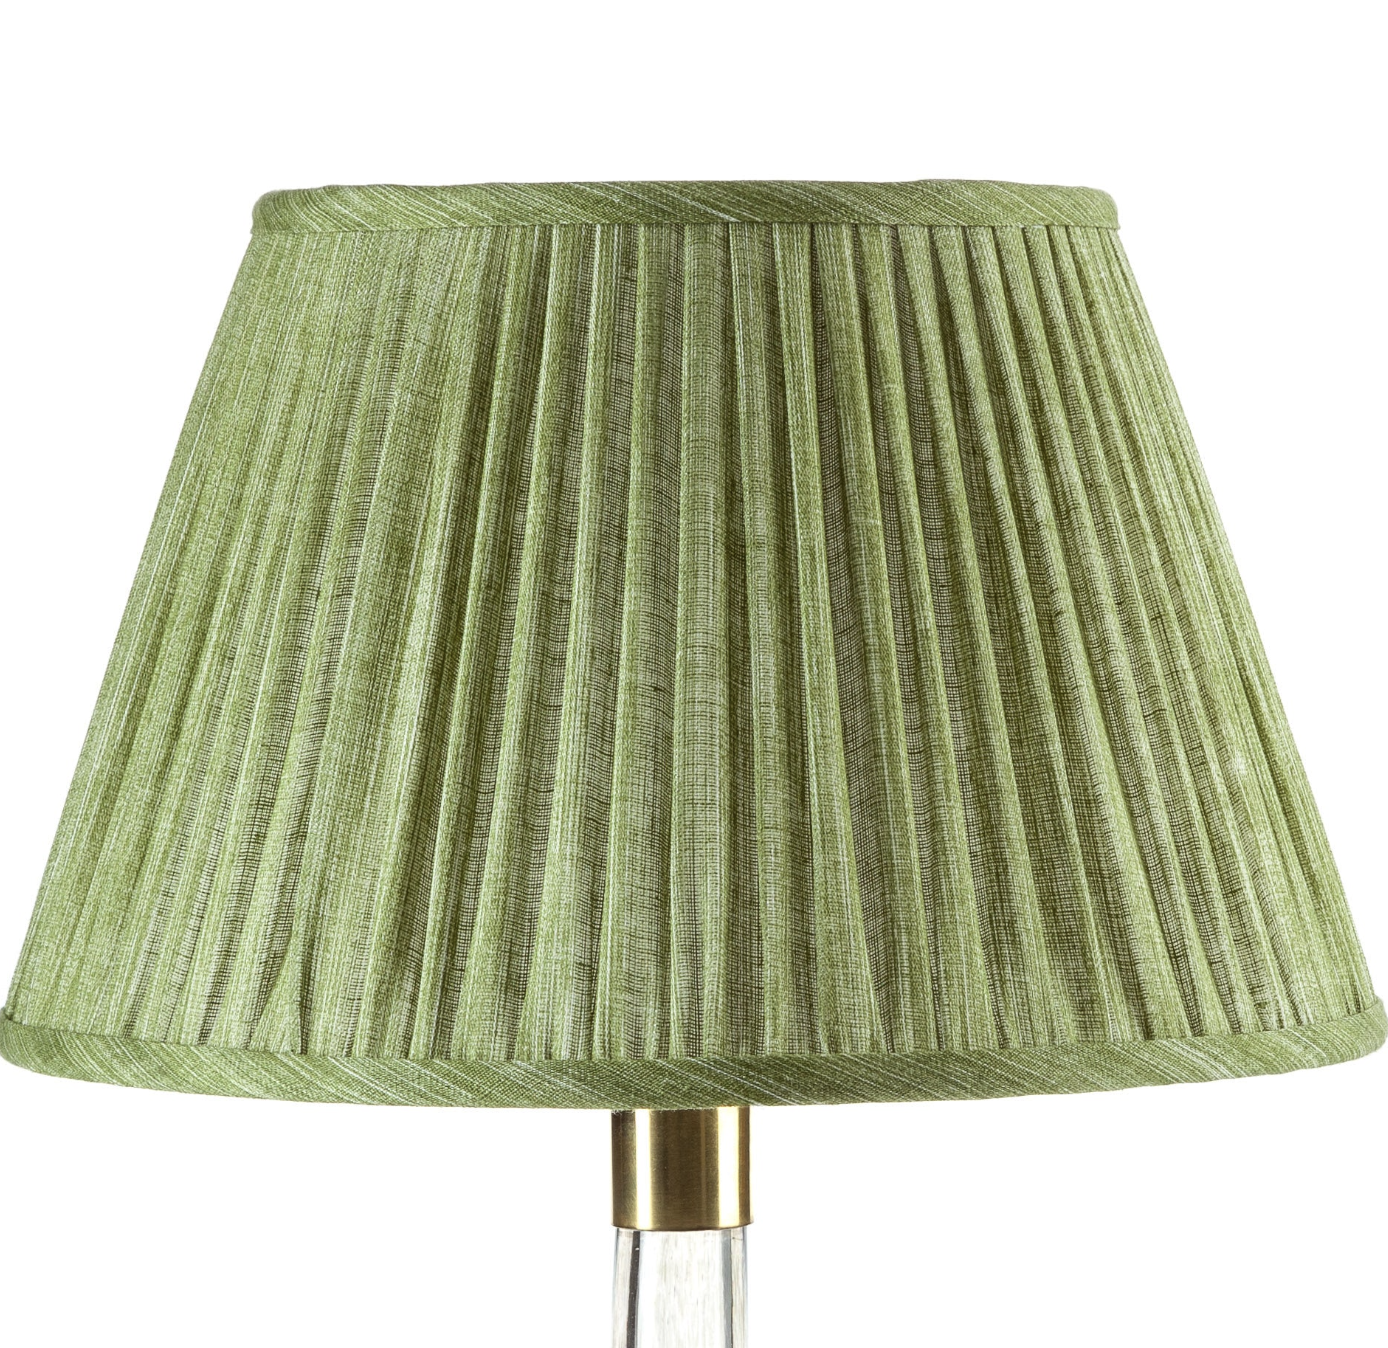 20" Fermoie Lampshade in Kintyre Green | Newport Lamp And Shade | Located in Newport, RI